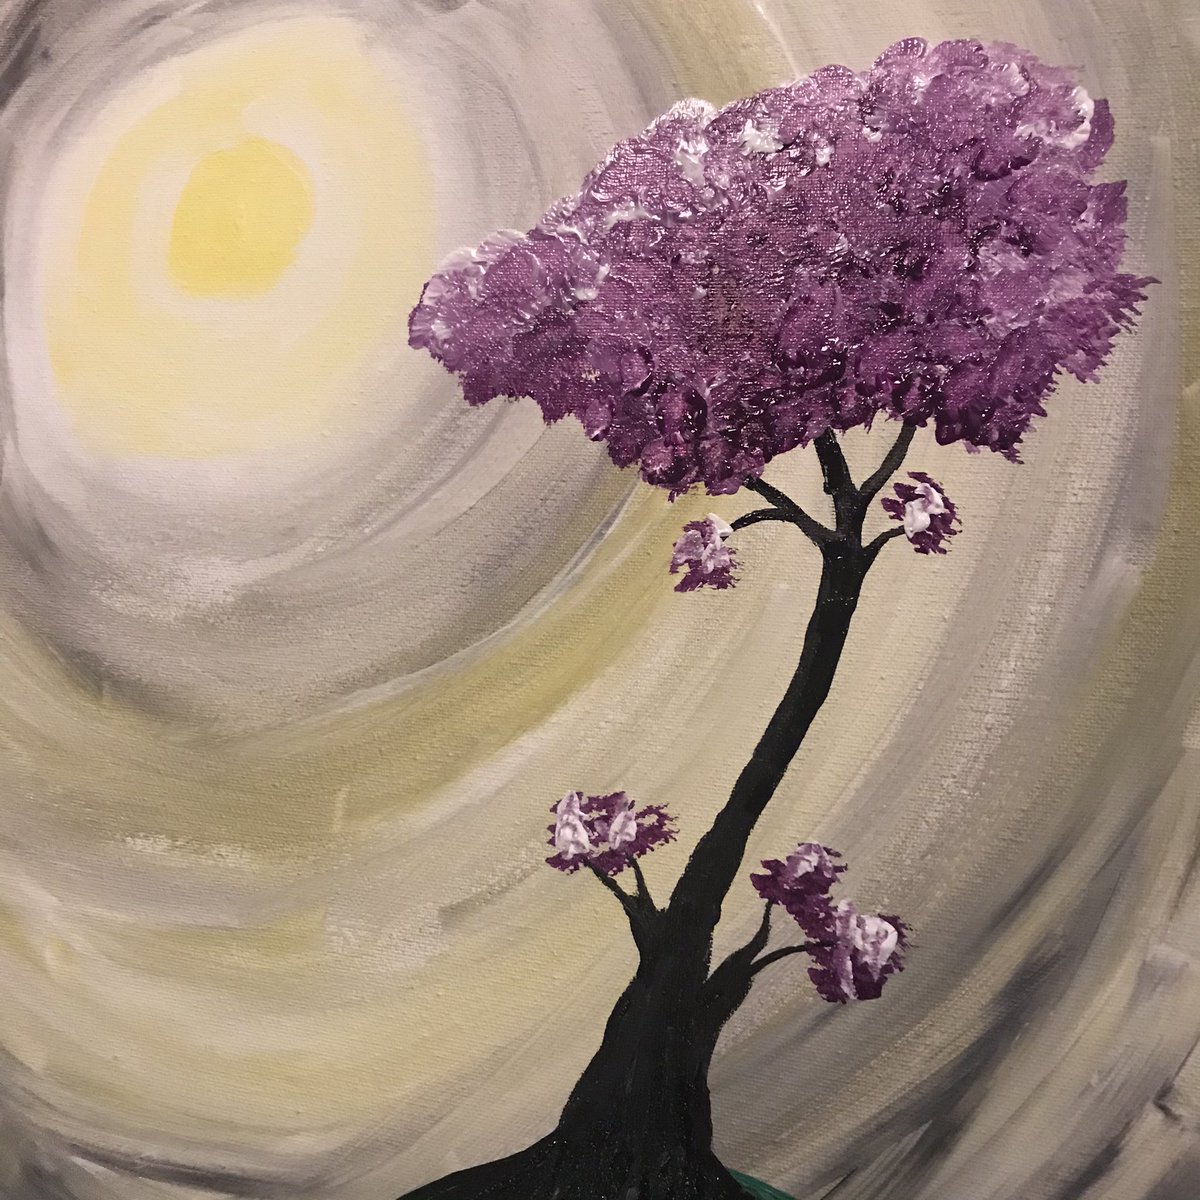 May or may not stream tonight as I enjoy a paint nite with the FamJam. #streamer #paintnite #artist